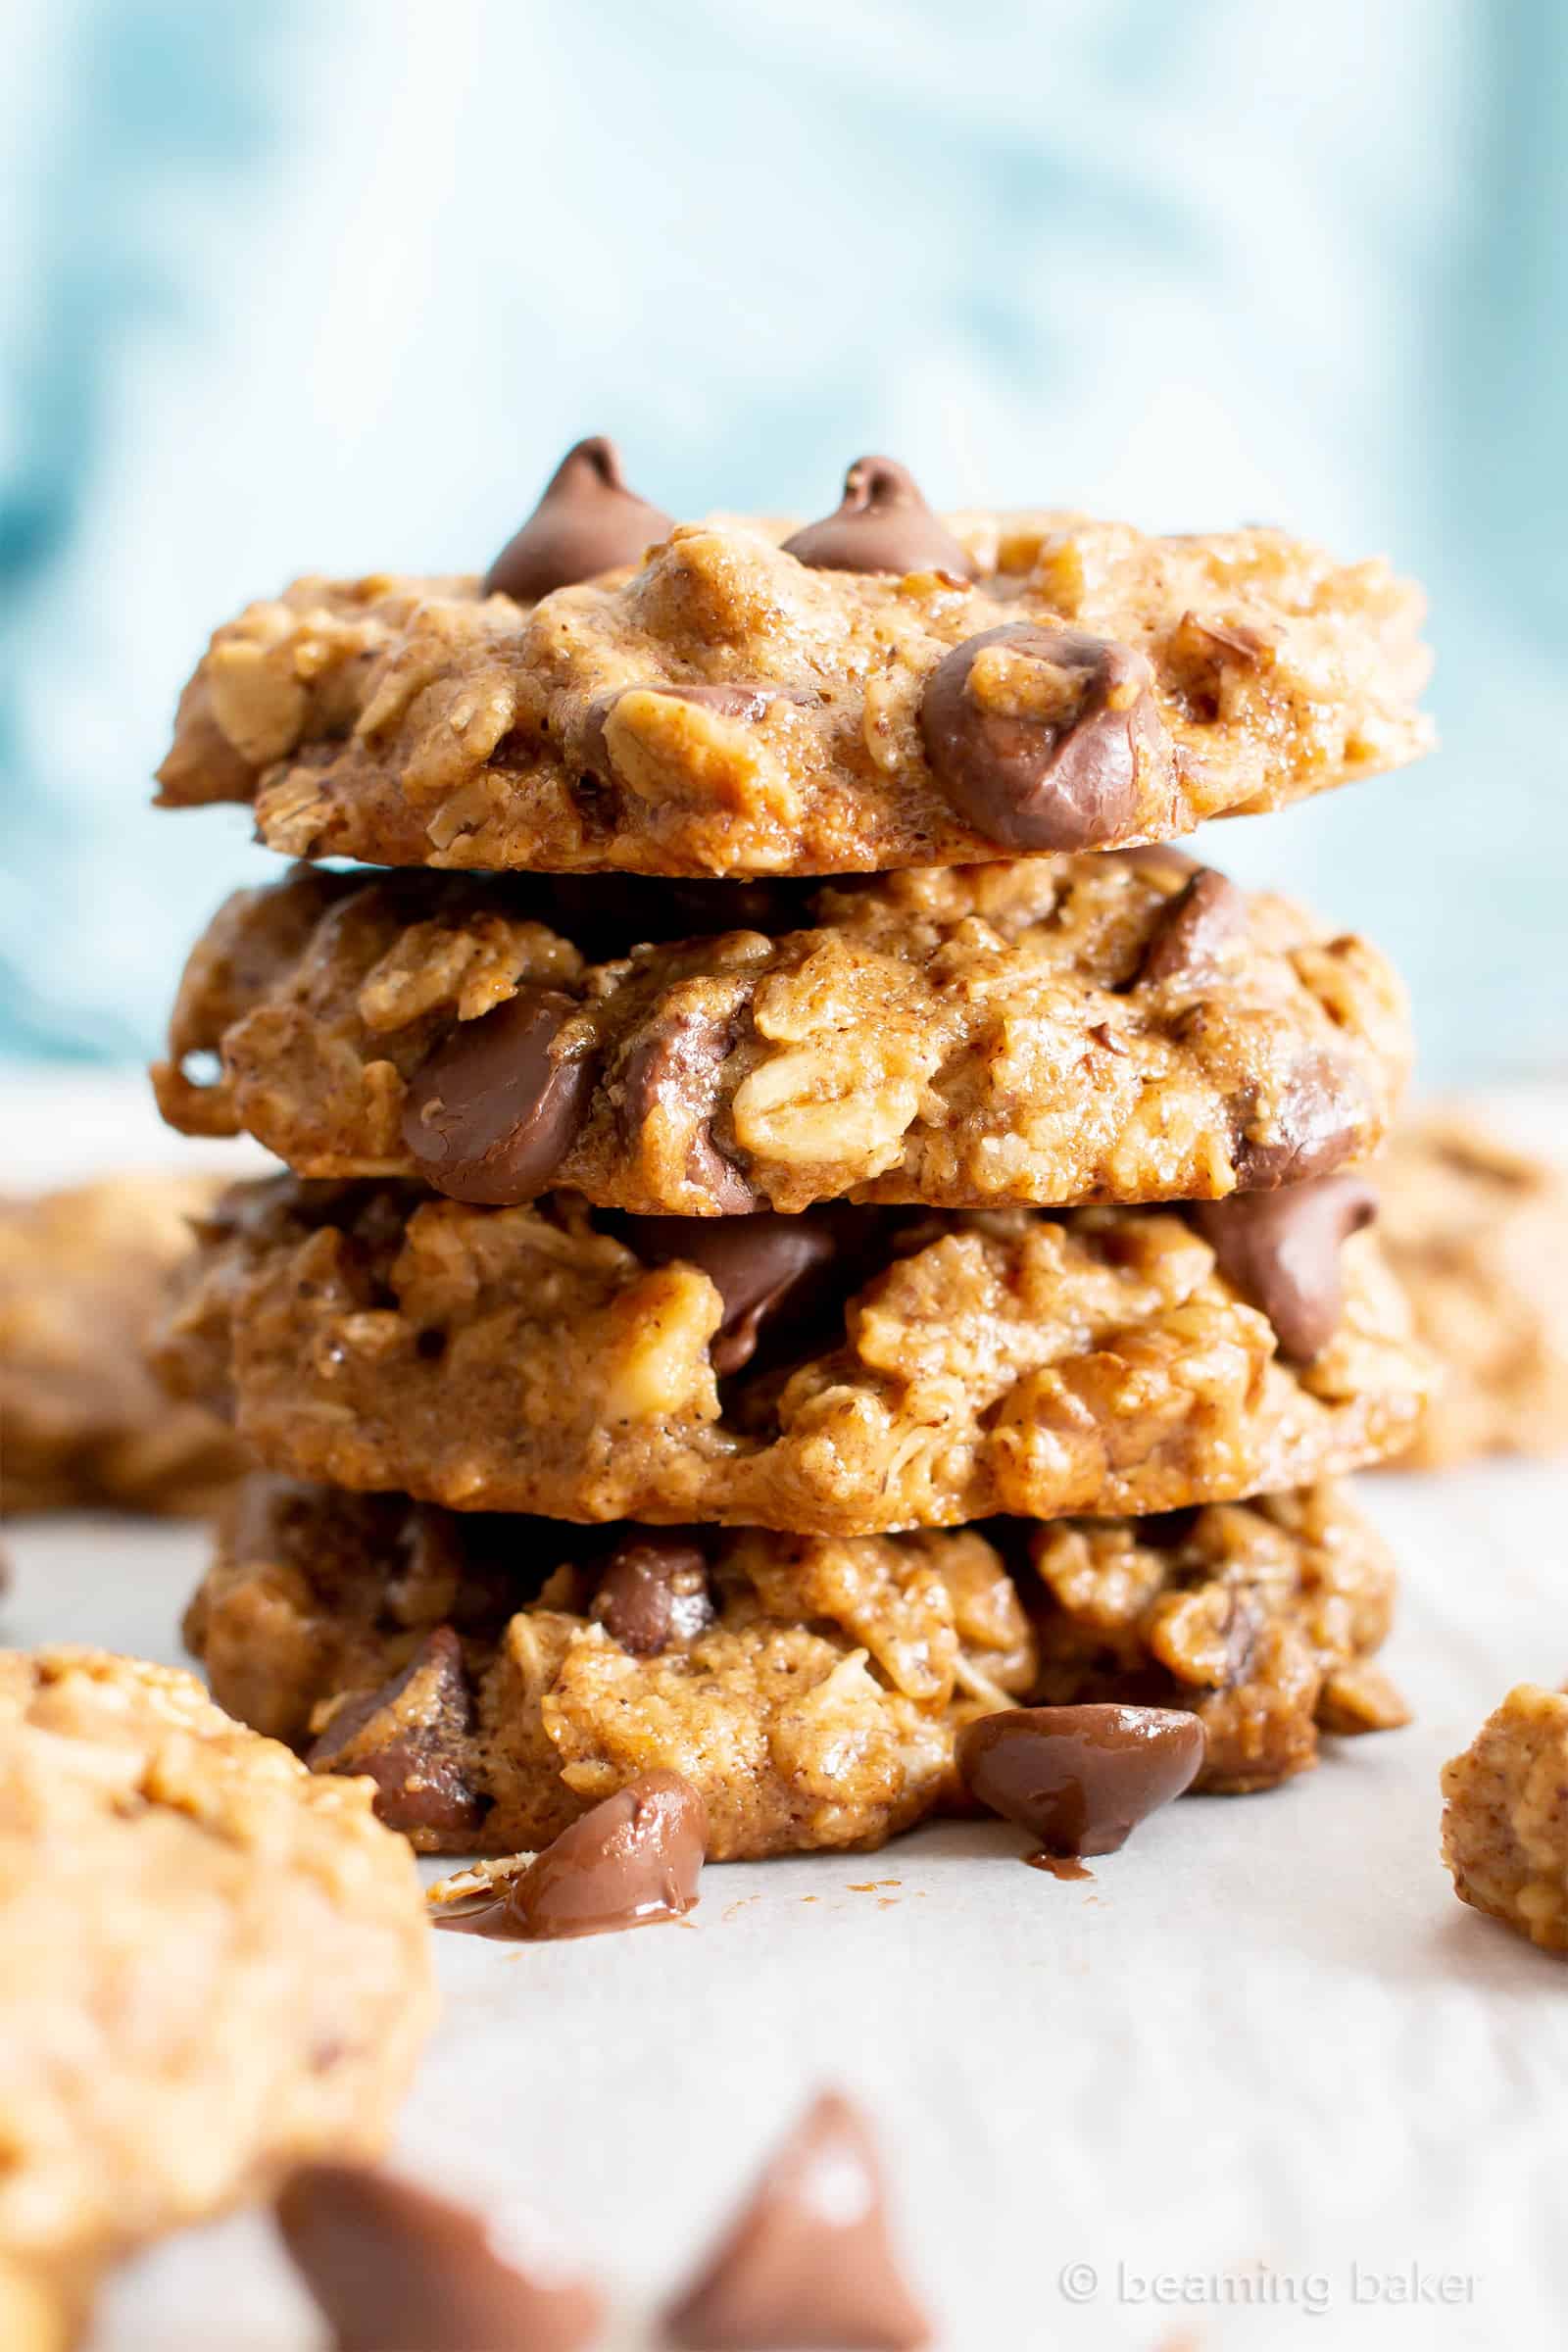 Easy Healthy Oatmeal Chocolate Chip Cookies: this easy healthy oatmeal chocolate chip cookies recipe yields chewy cookies with crispy edges and lots of chocolate chips! Vegan, Gluten-Free, Dairy-Free, Healthy. #Healthy #OatmealCookies #HealthyCookies #ChocolateChip | Recipe at BeamingBaker.com